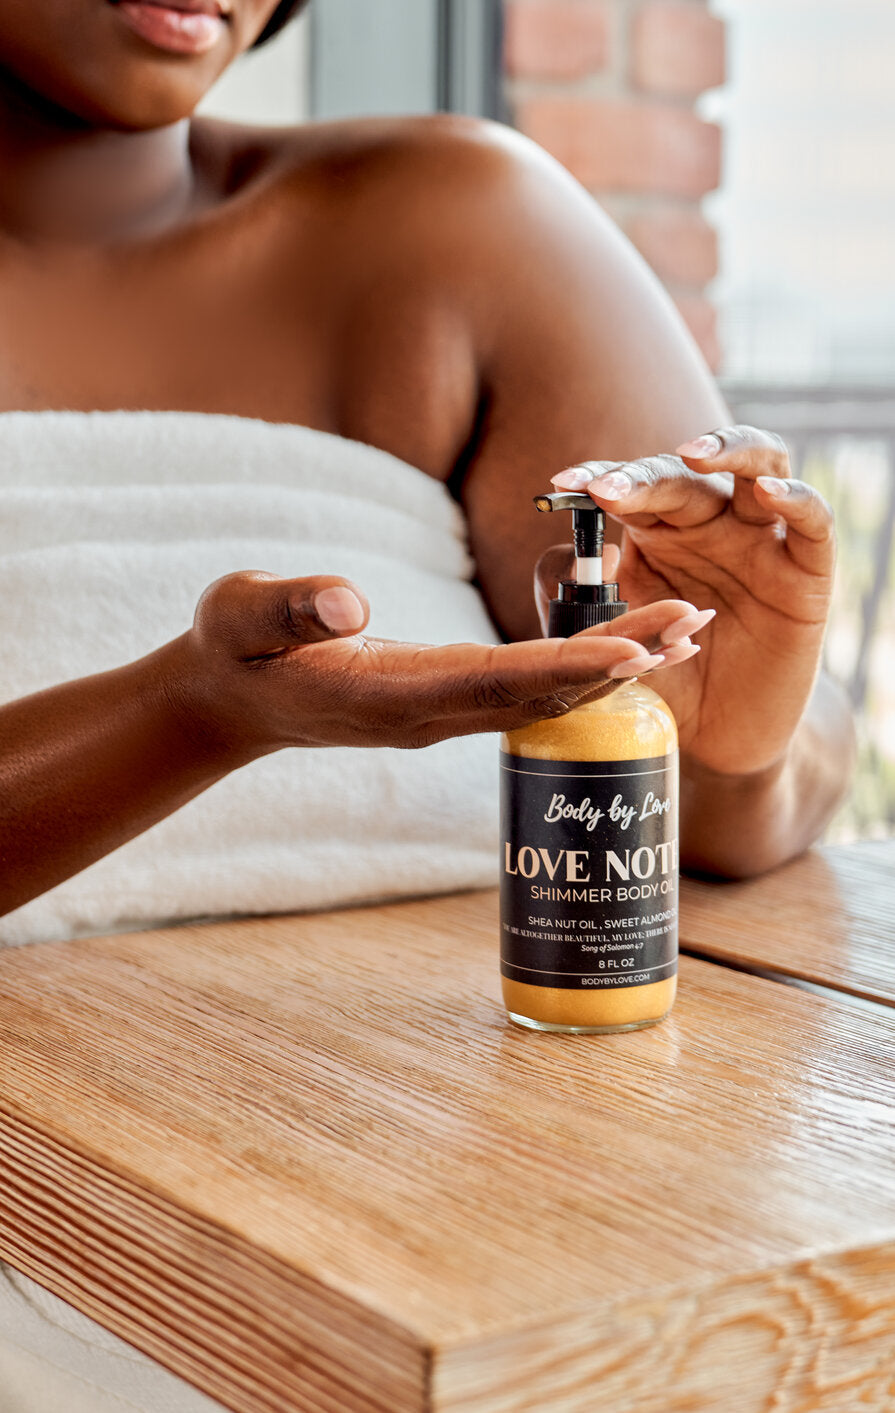 Plus size woman in oversized bath towel from brand Body by Love using Love notes shimmer body oil after the shower.